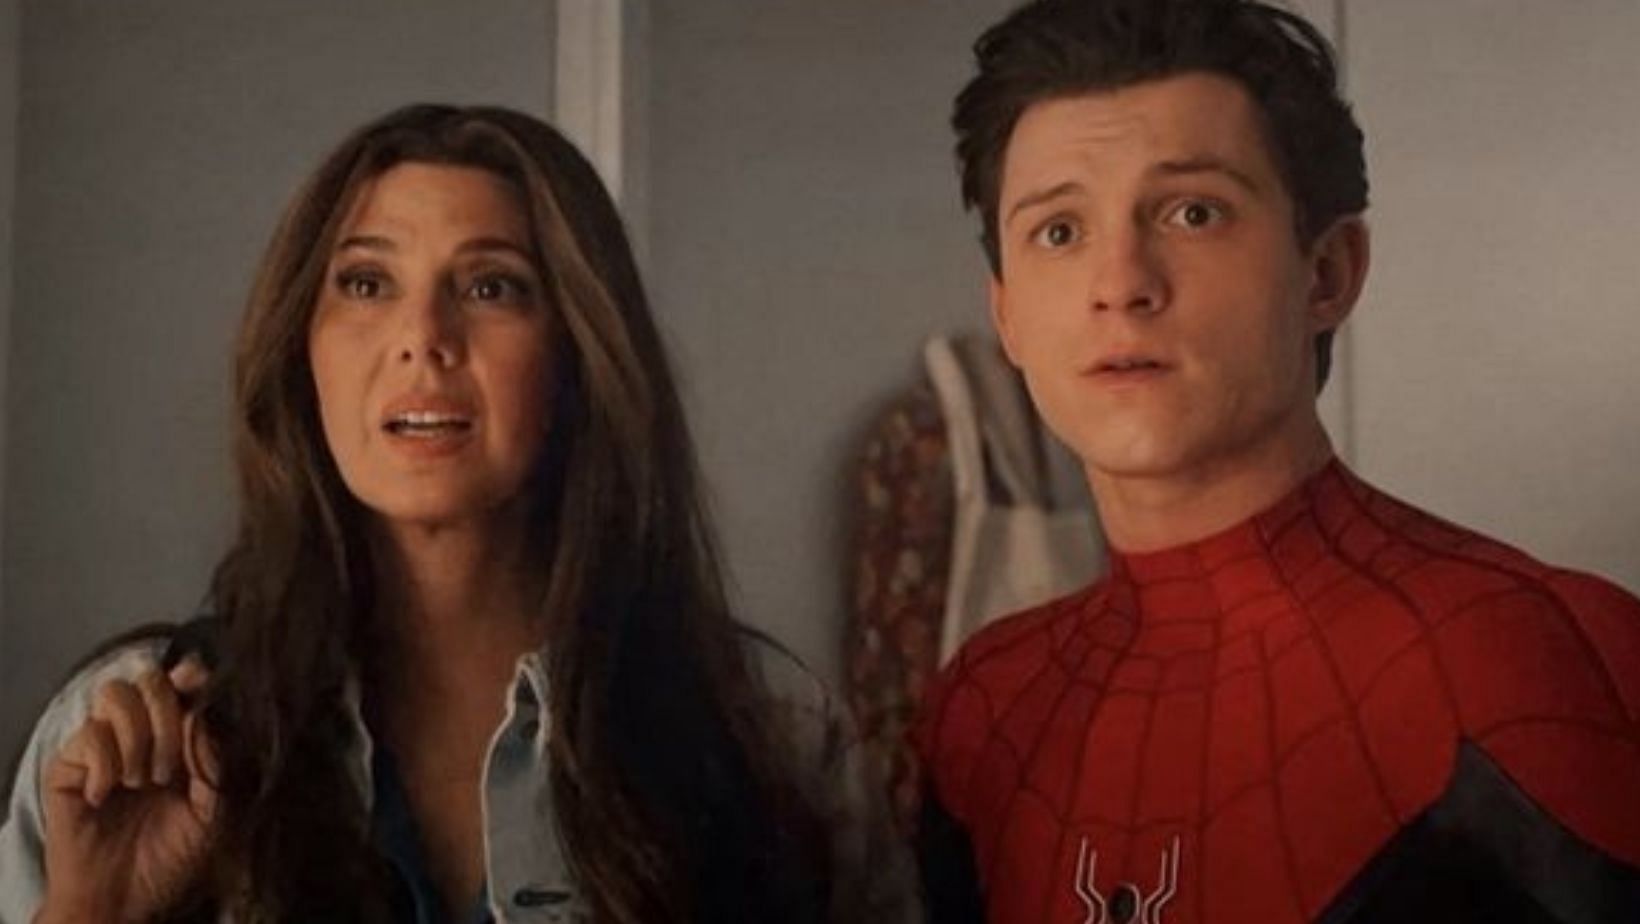 Peter Parker and Aunt May: A bond that shaped the Spider-Man story (Image via Sony and Marvel Studios)